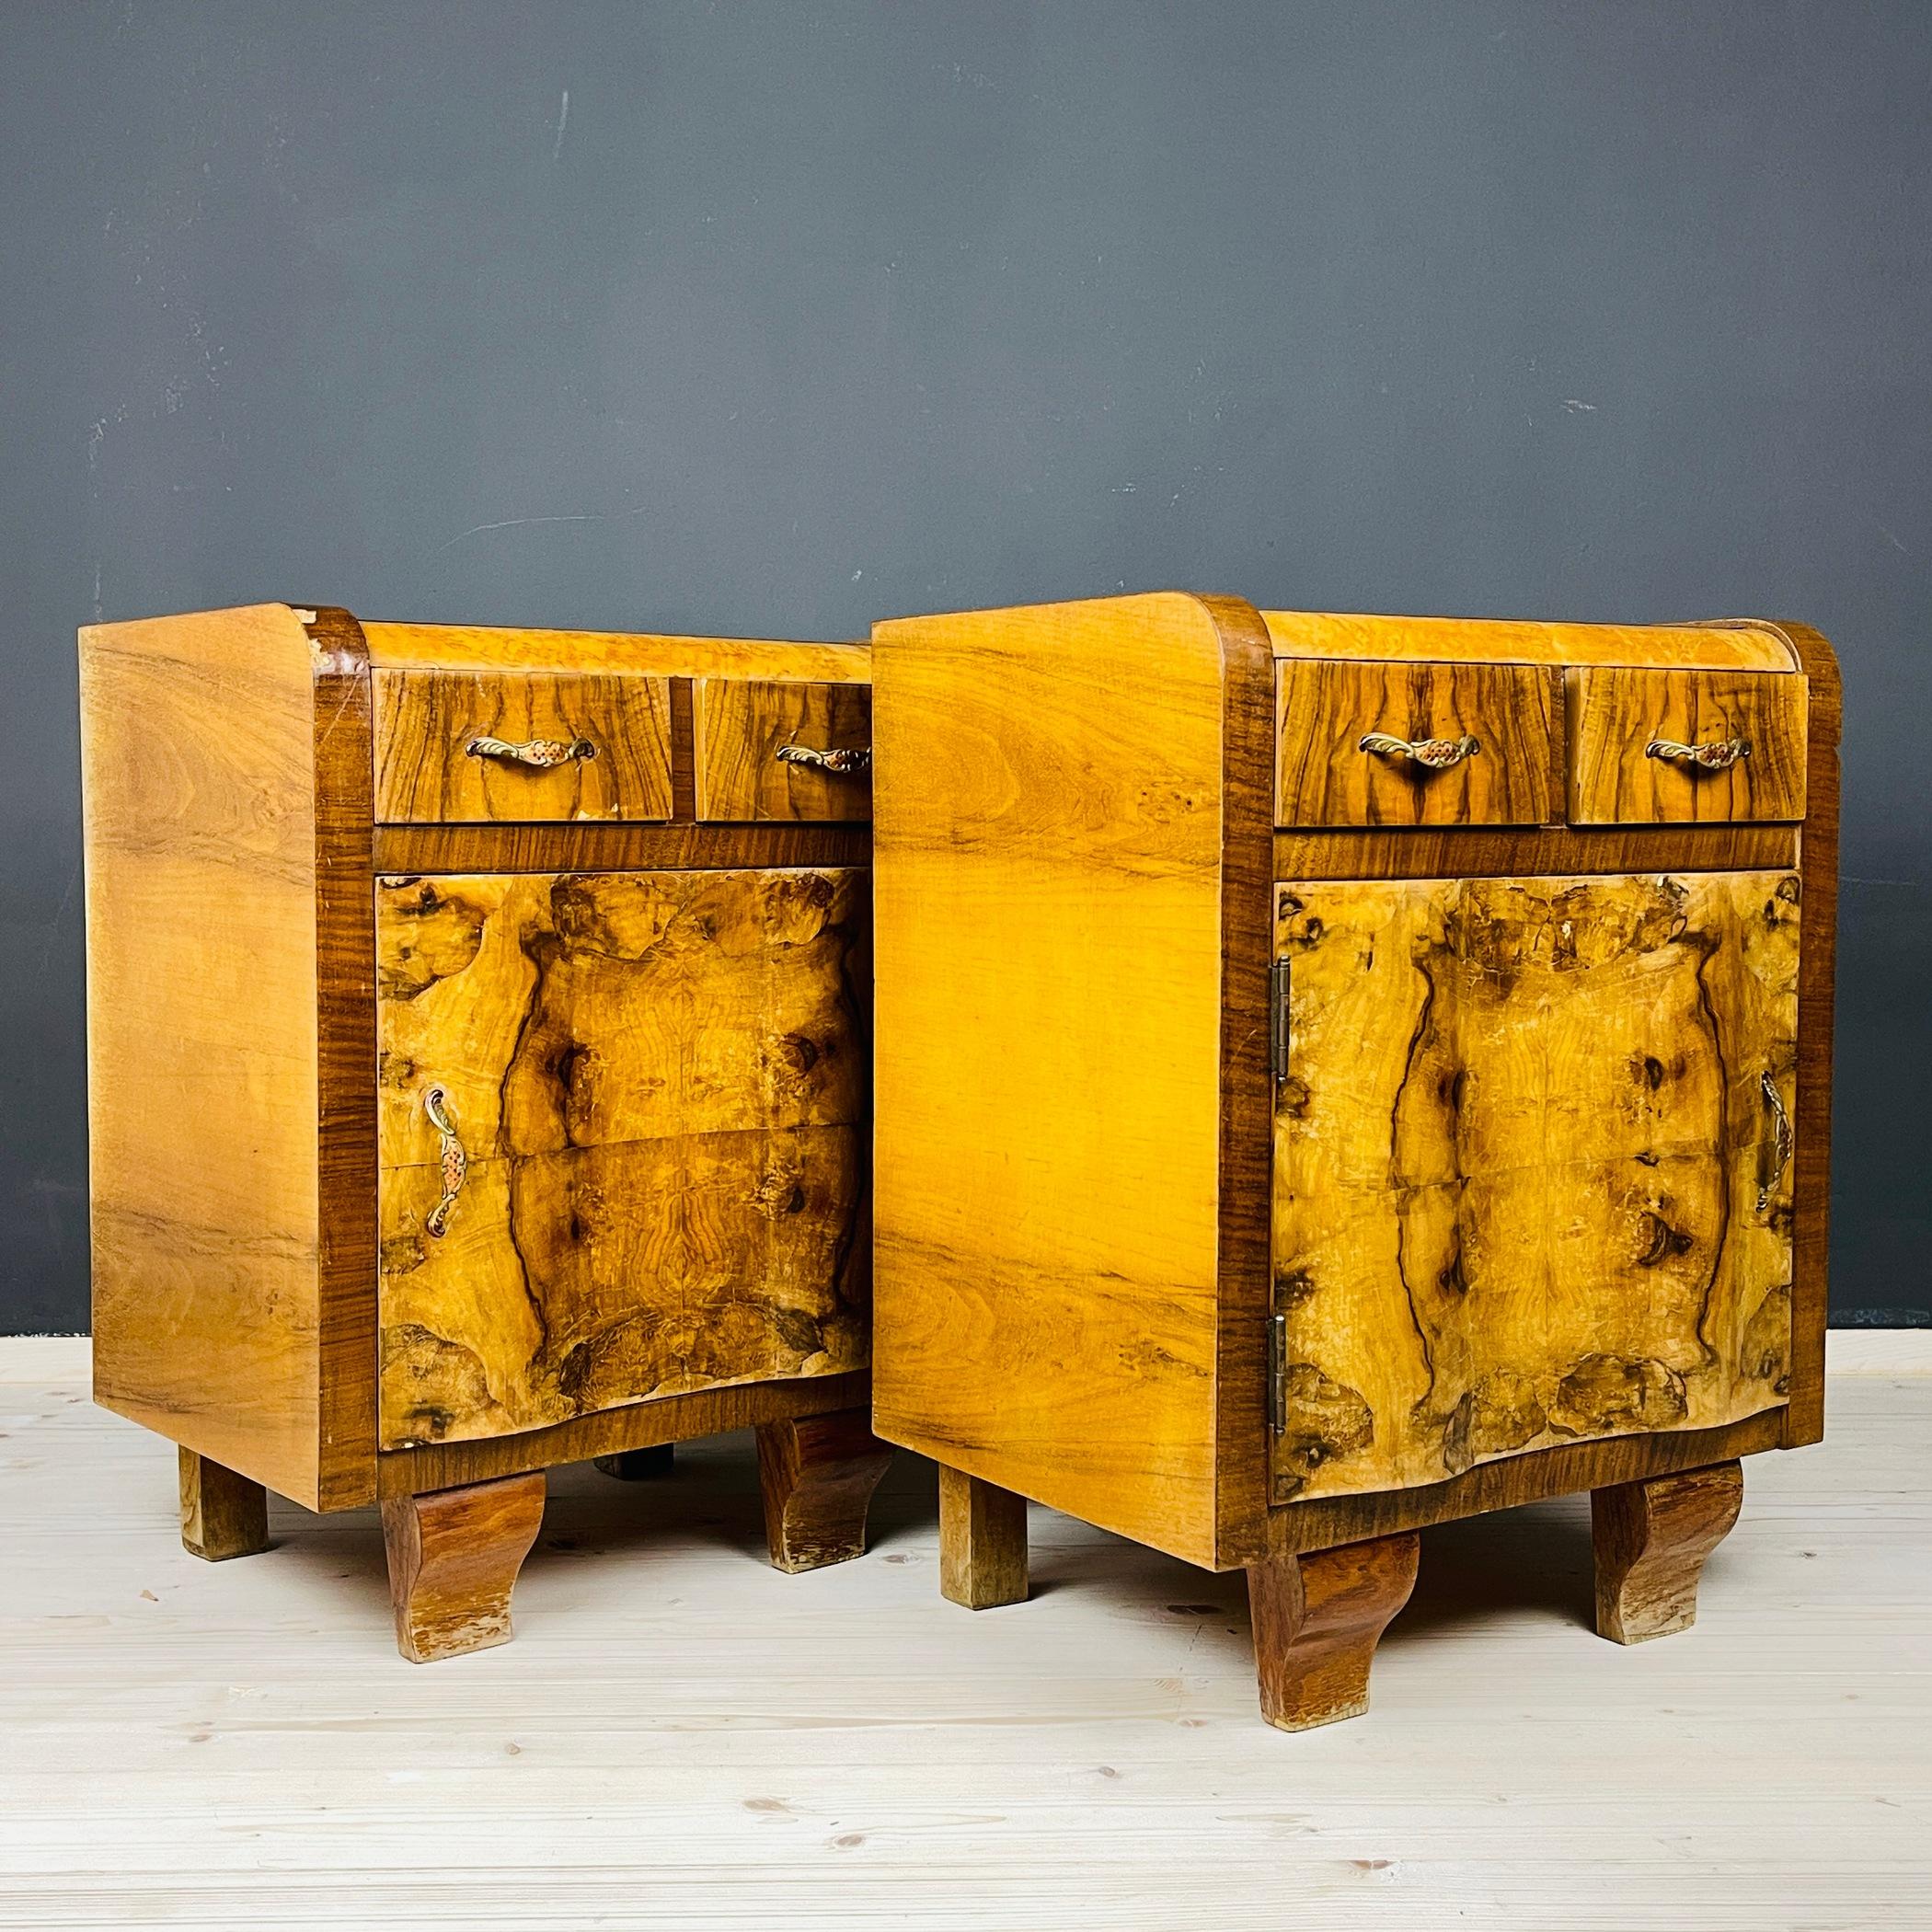 Pair beautiful bedside tables were made in the 40s in Italy. Made of solid wood, plywood and beautiful veneer. Original fittings and glass.
They have been preserved to this day in good condition. Despite their venerable age, they look excellent.